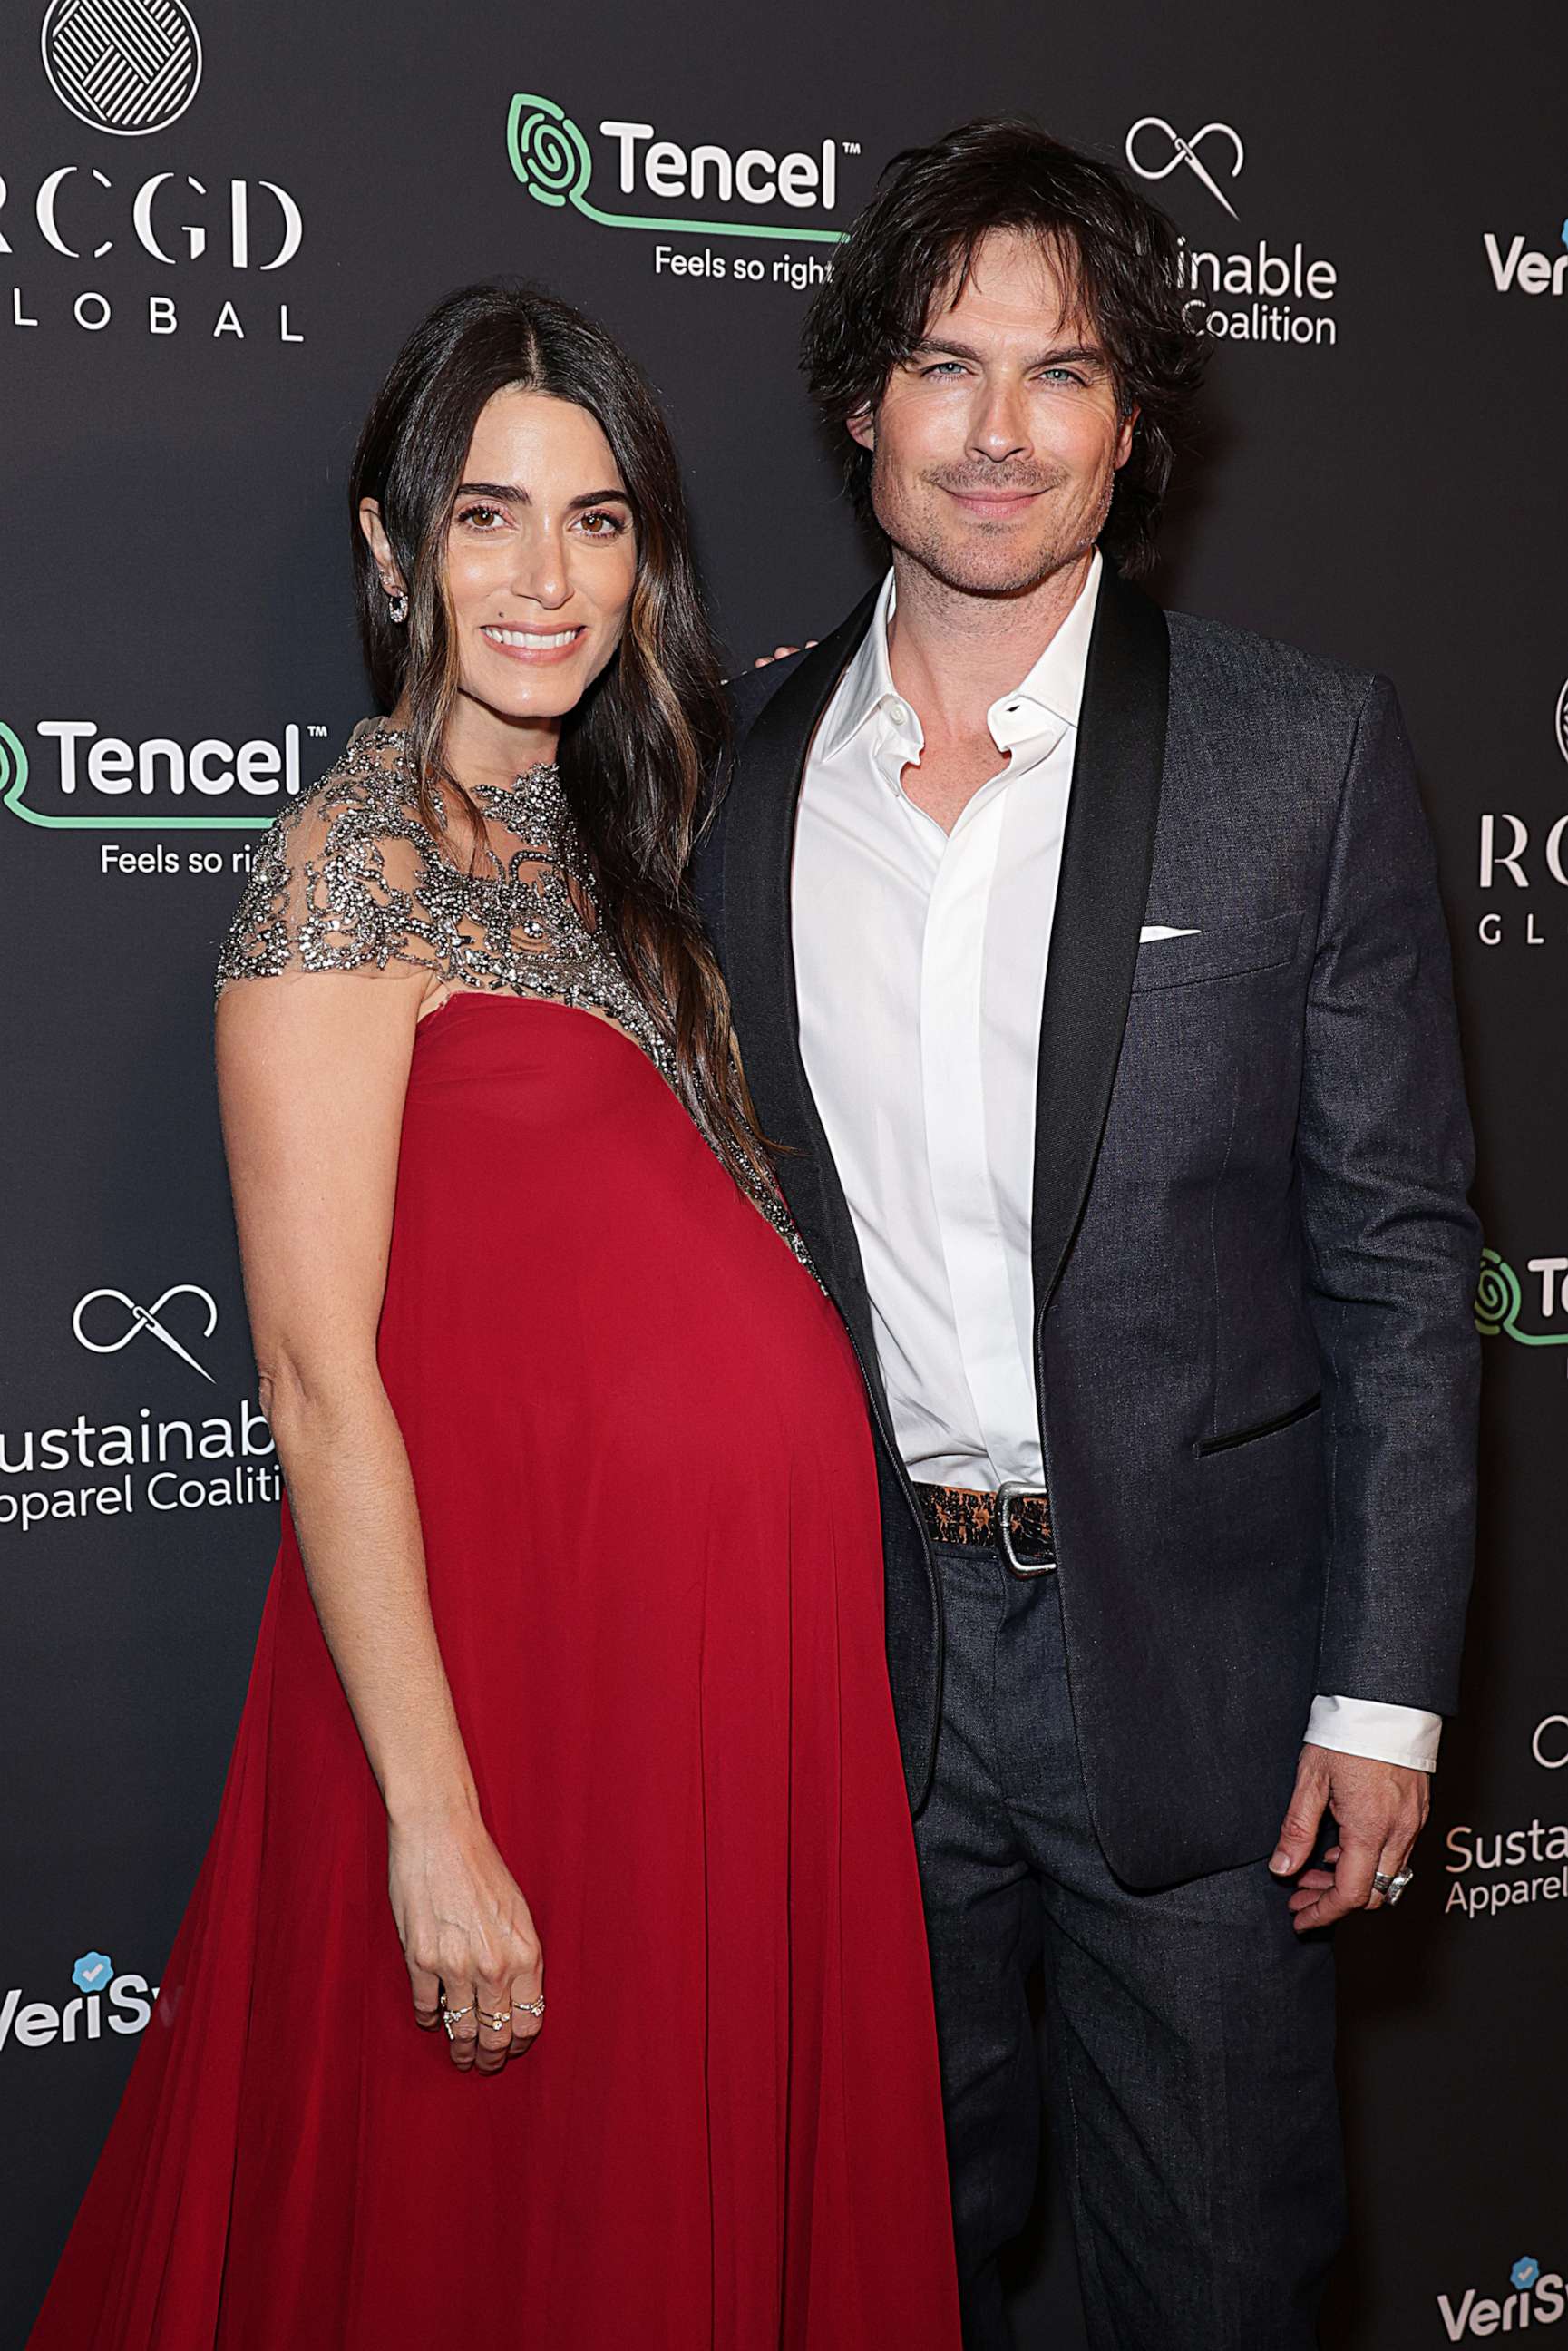 PHOTO: Nikki Reed and Ian Somerhalder attend RCGD Global Pre-Oscars annual celebration, March 9, 2023, in West Hollywood, Calif.